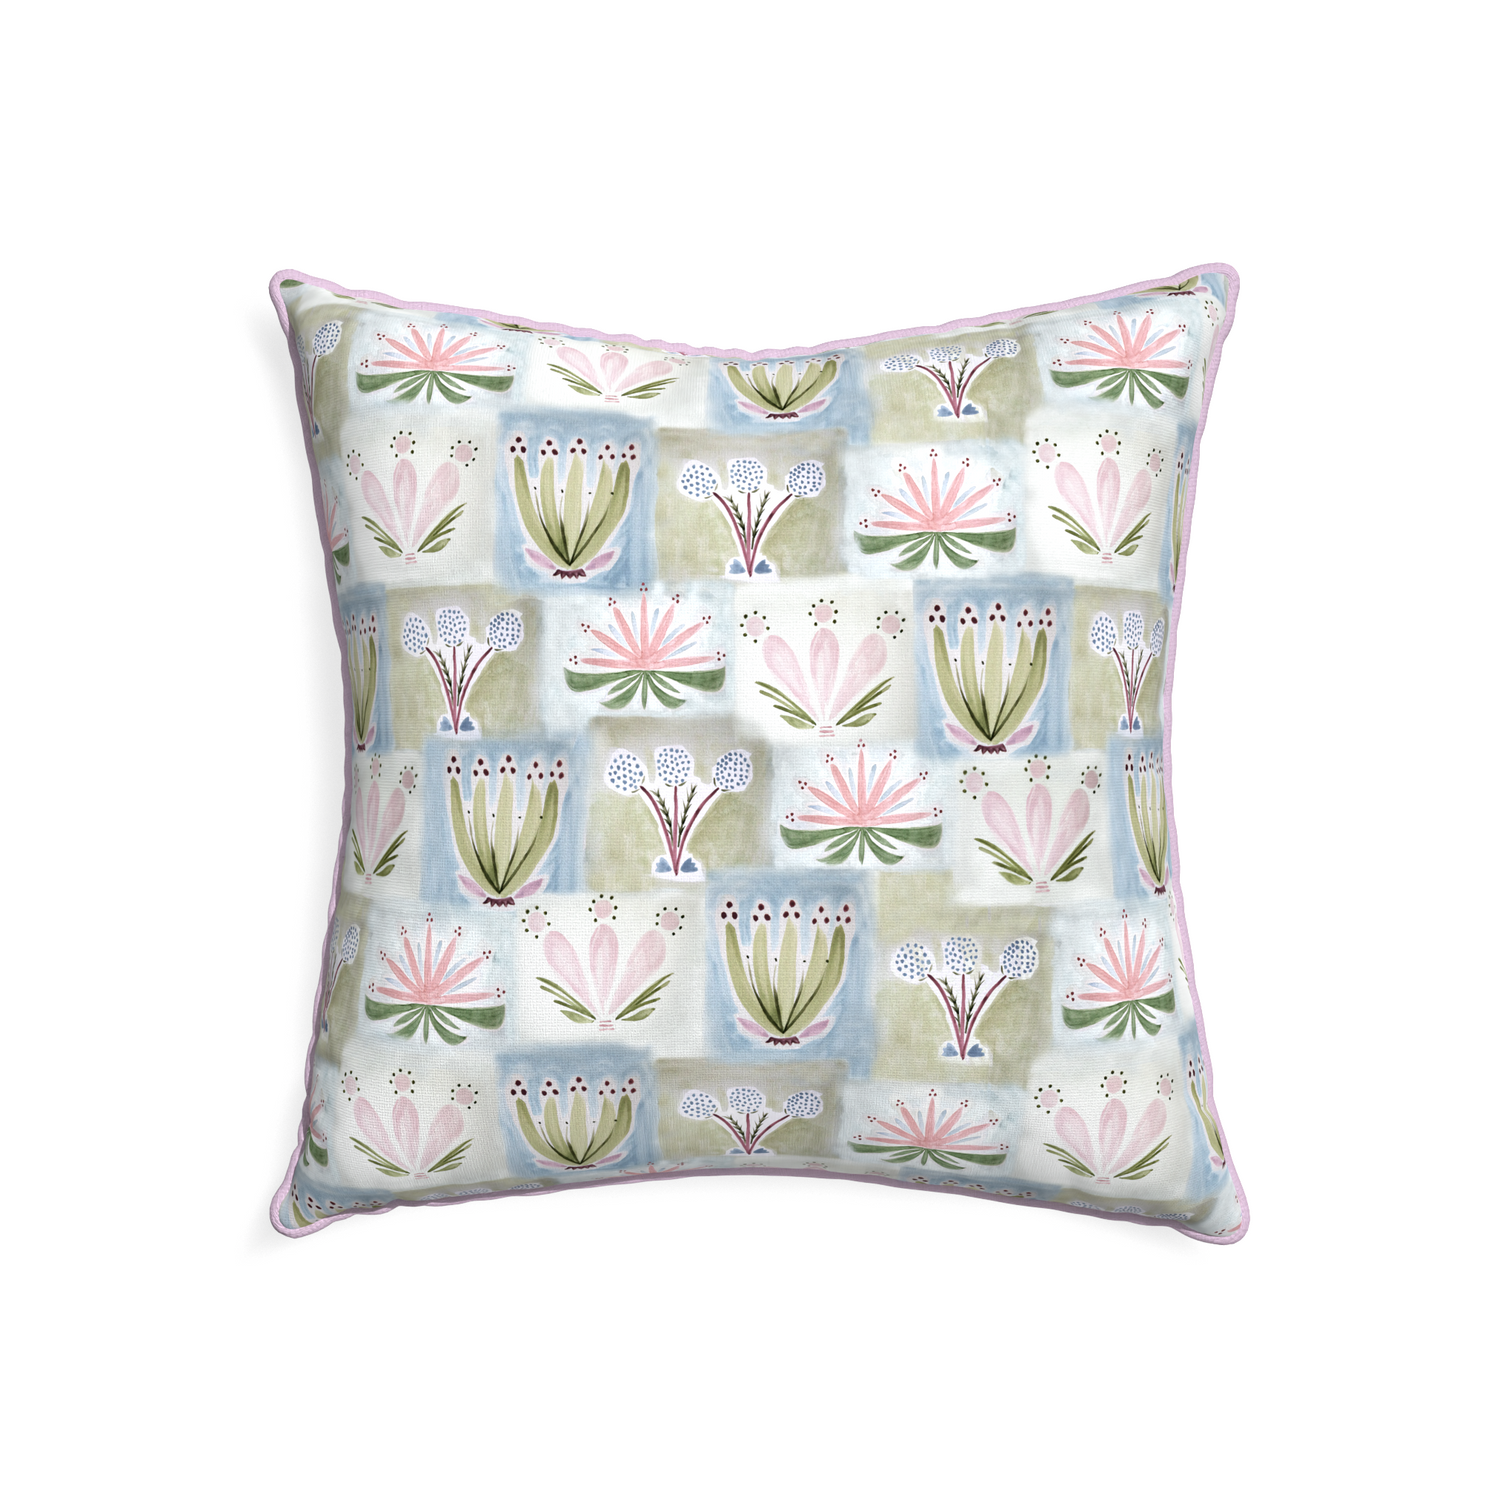 22-square harper custom hand-painted floralpillow with l piping on white background